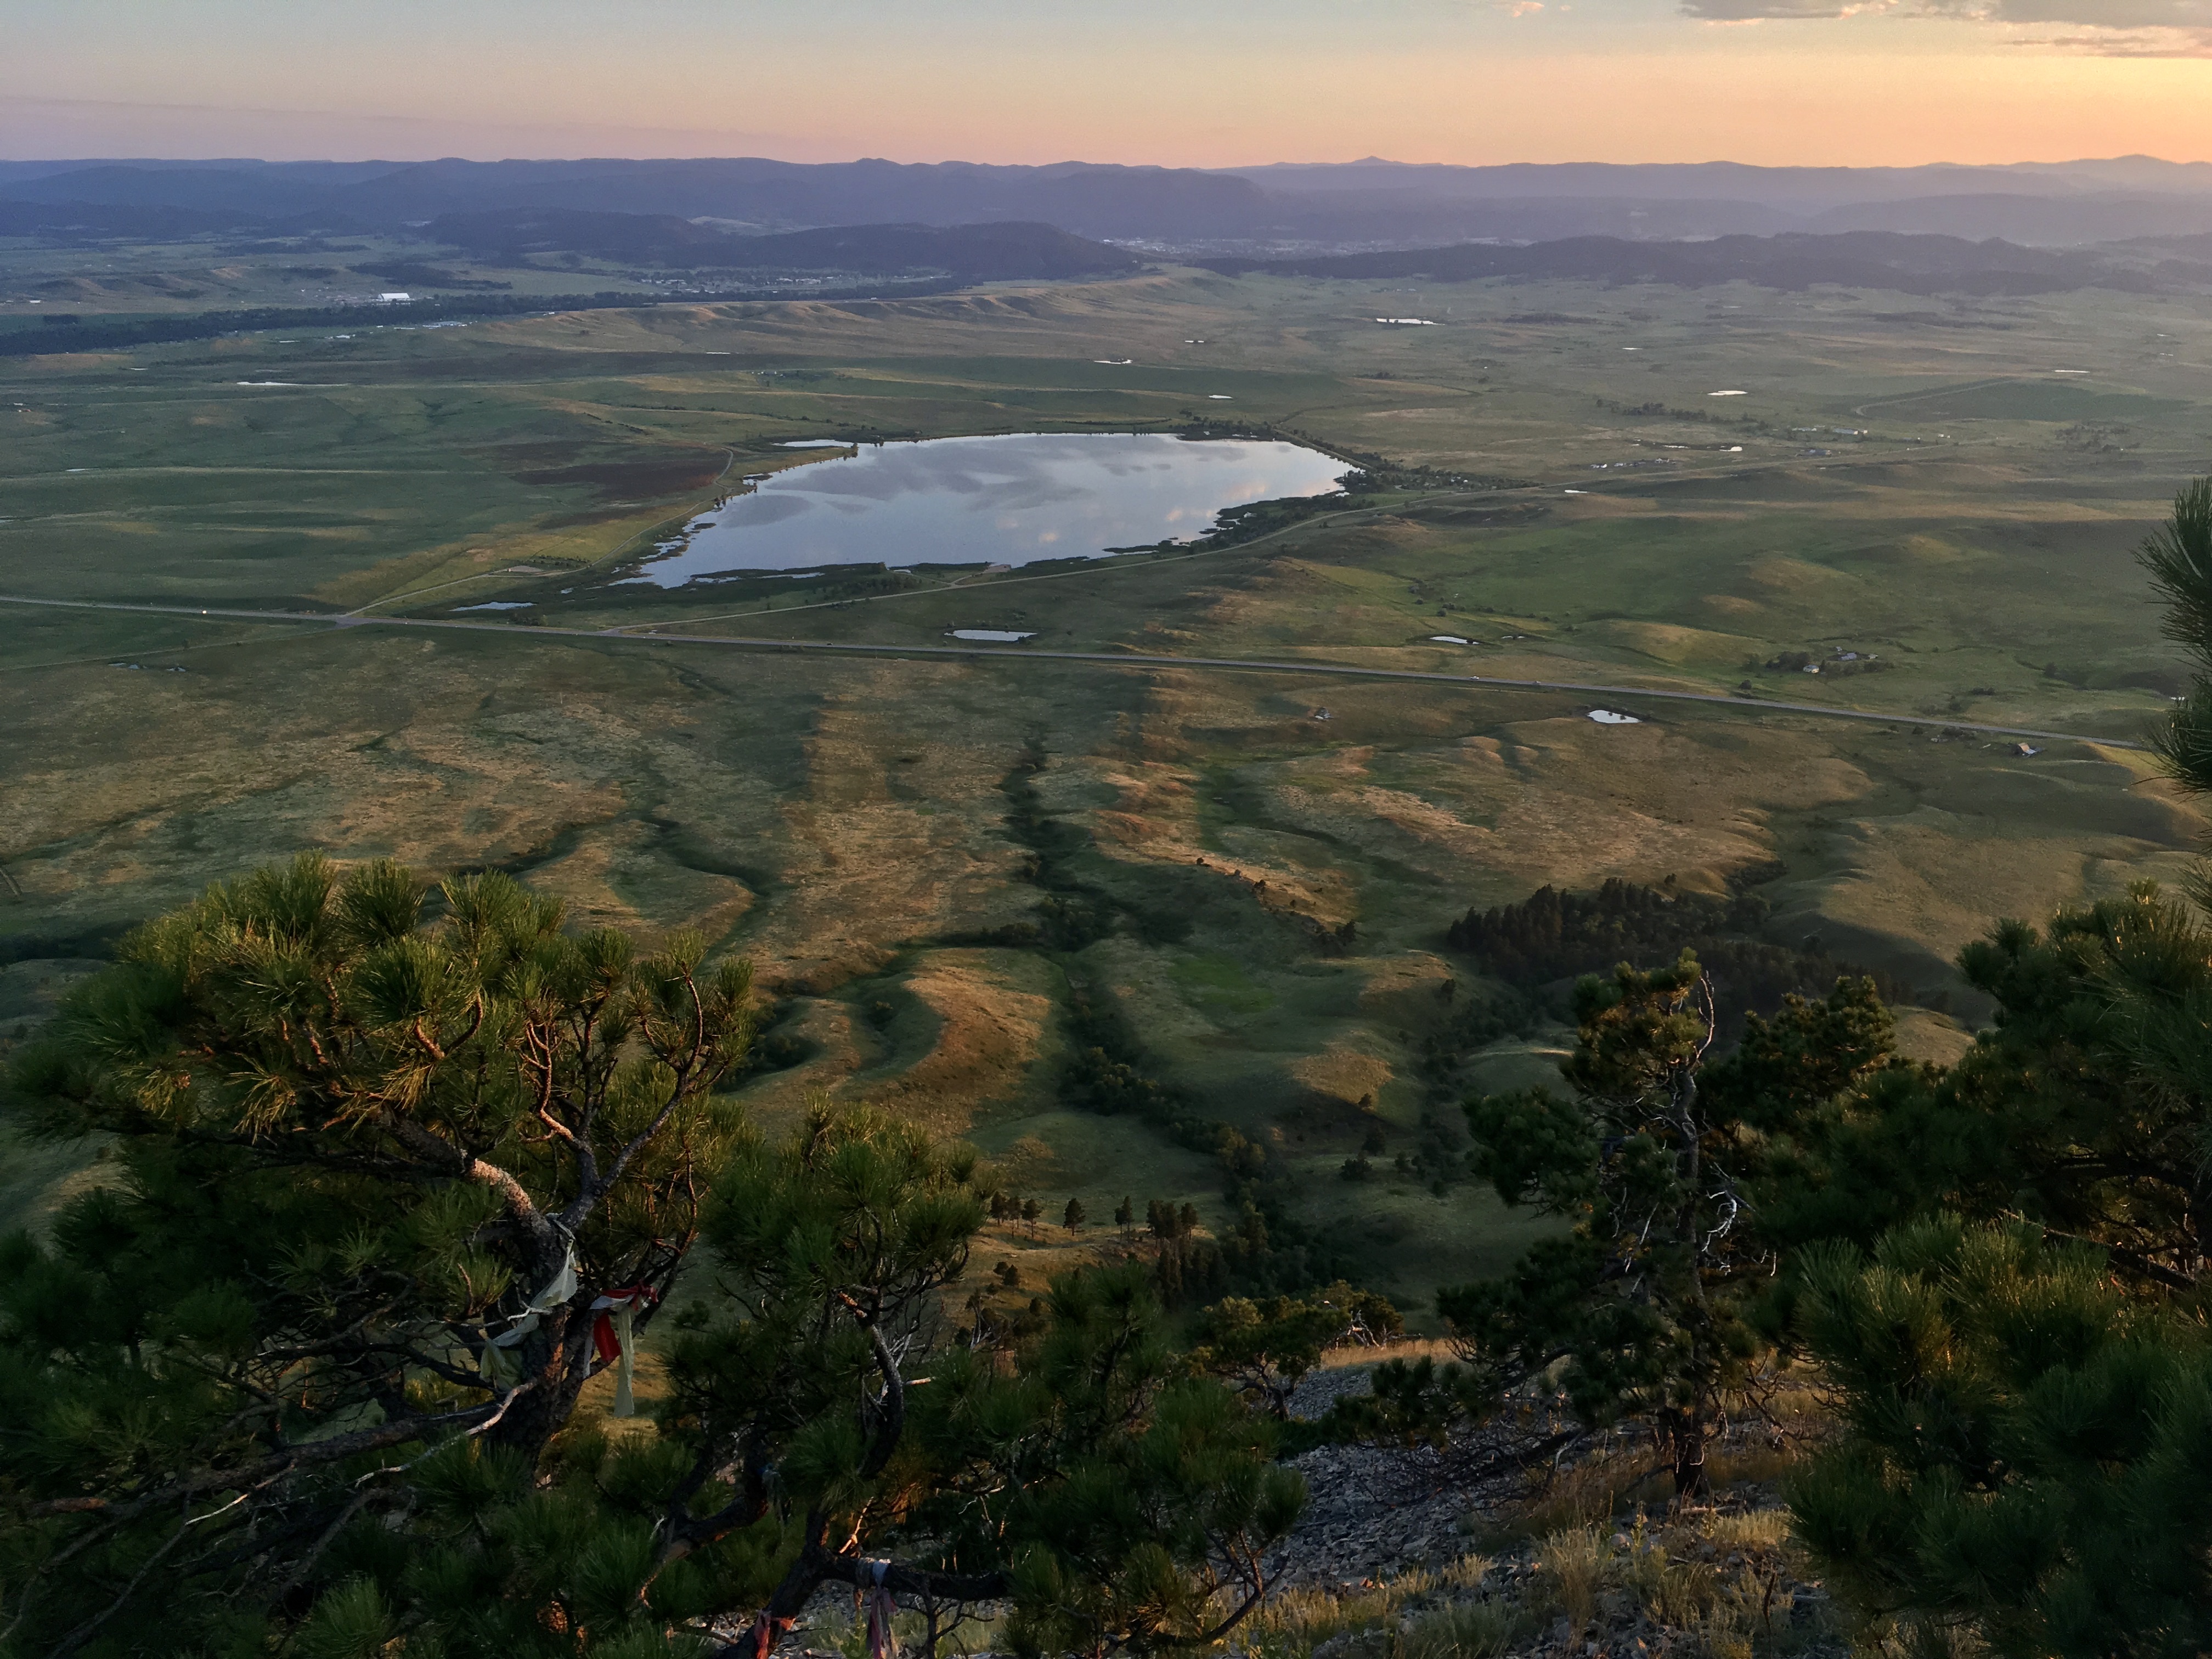 Looking west toward Sturgis from the summit of Bear Butte, SD (northern terminus of GPT pilot trail and Centennial Trail) at sunset.